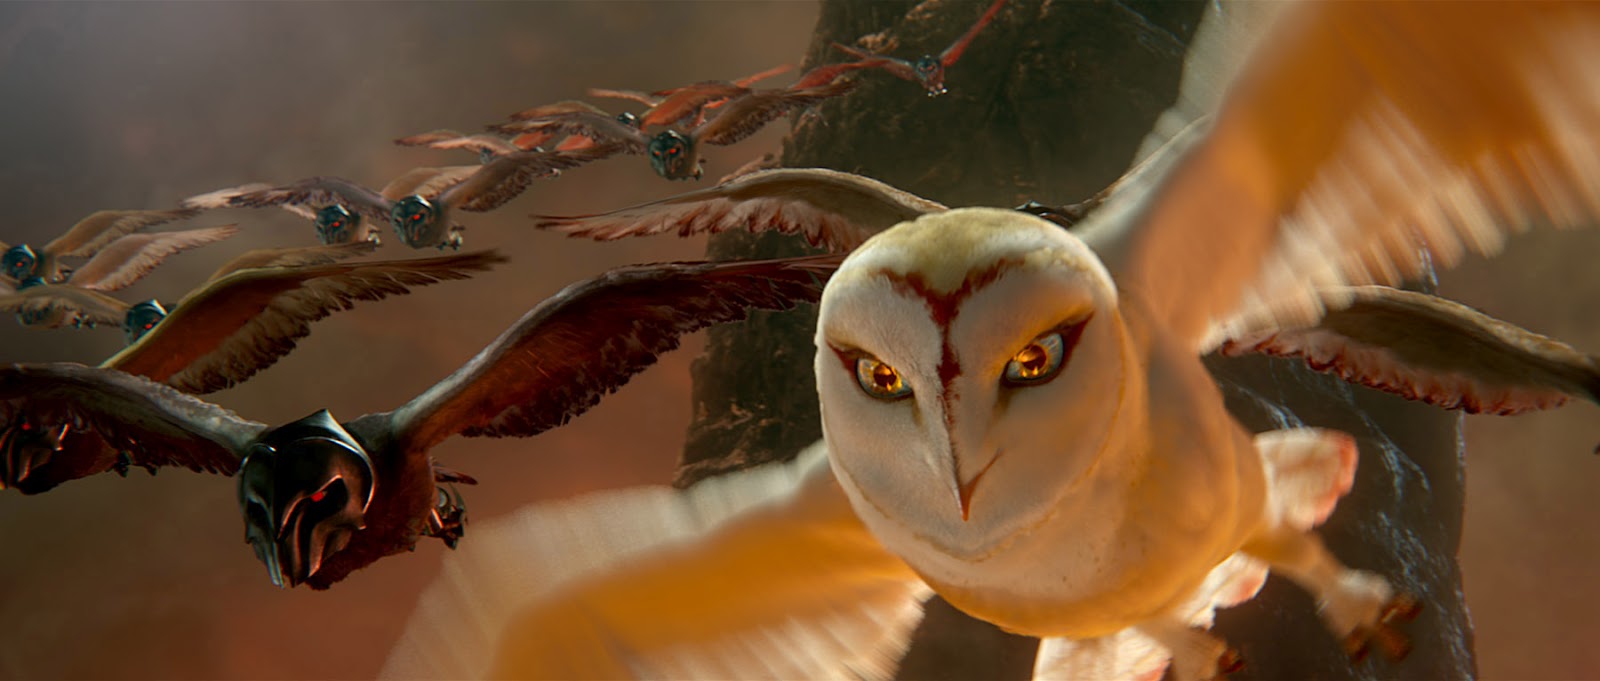 MoviE Picture: Legend of the Guardians: The Owls of Ga'hoole [2010]